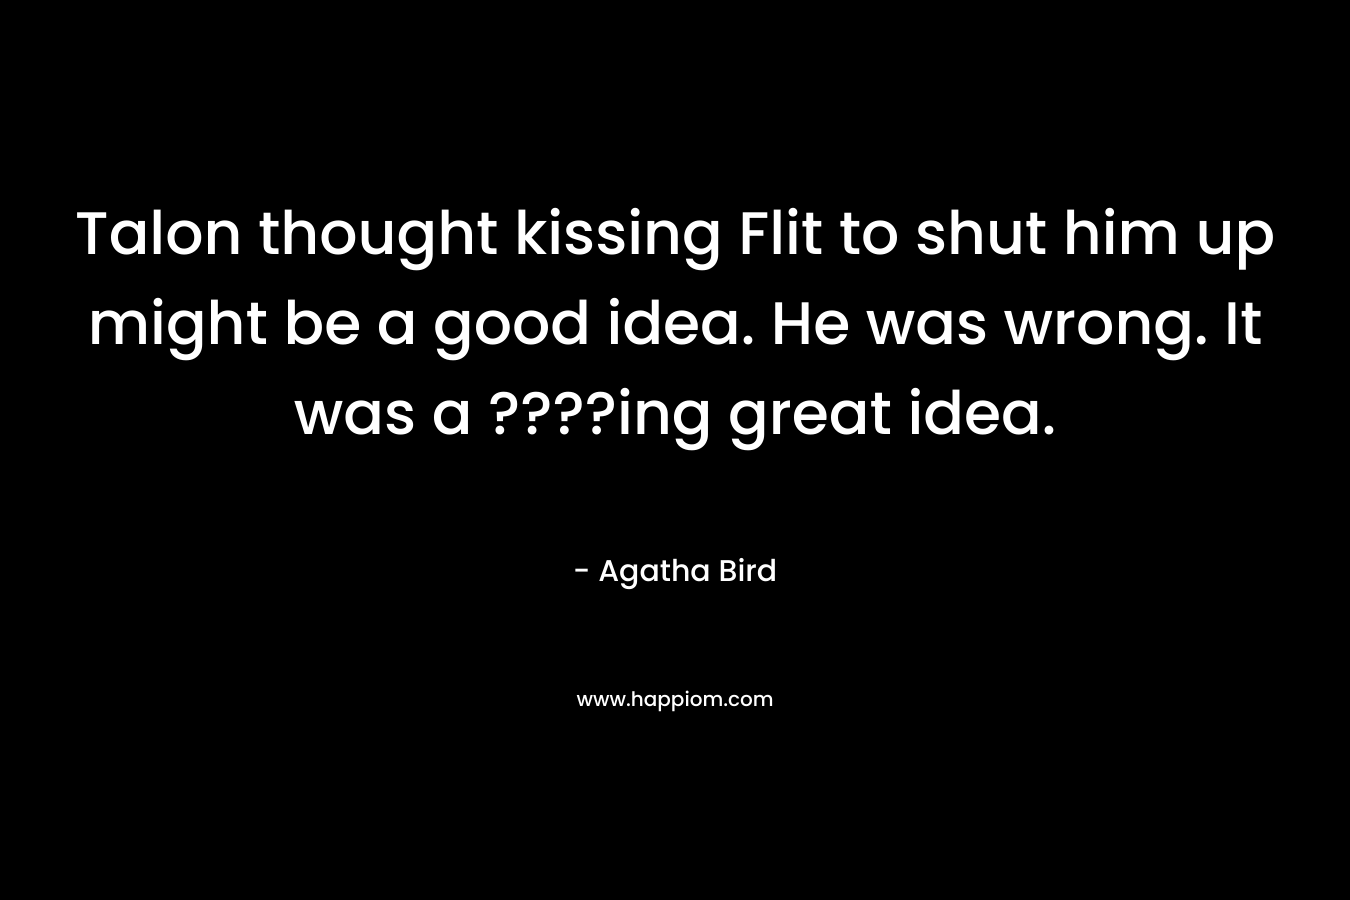 Talon thought kissing Flit to shut him up might be a good idea. He was wrong. It was a ????ing great idea.